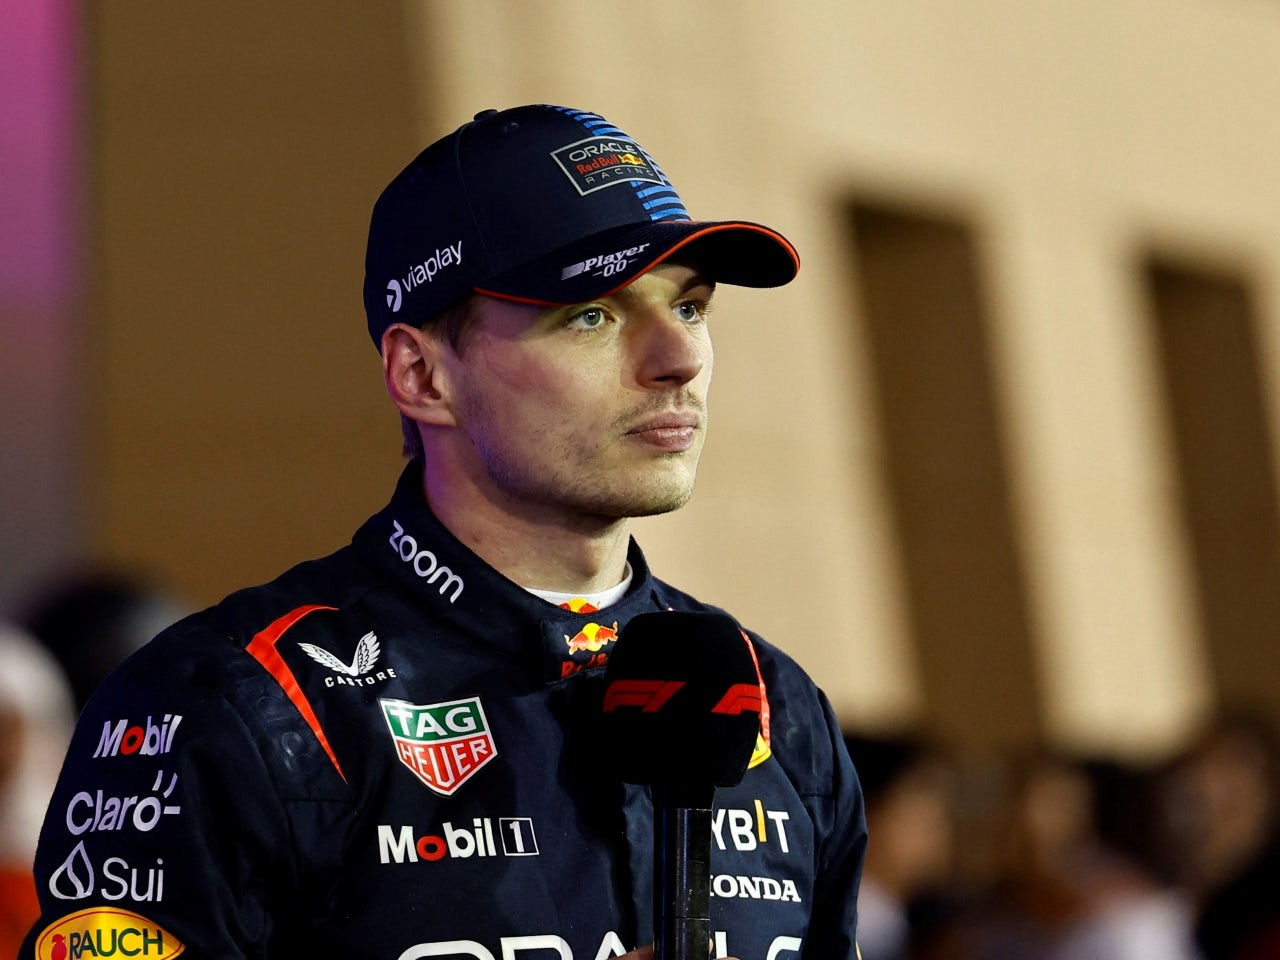 Verstappen achieves Chinese Grand Prix sprint race, qualifying double